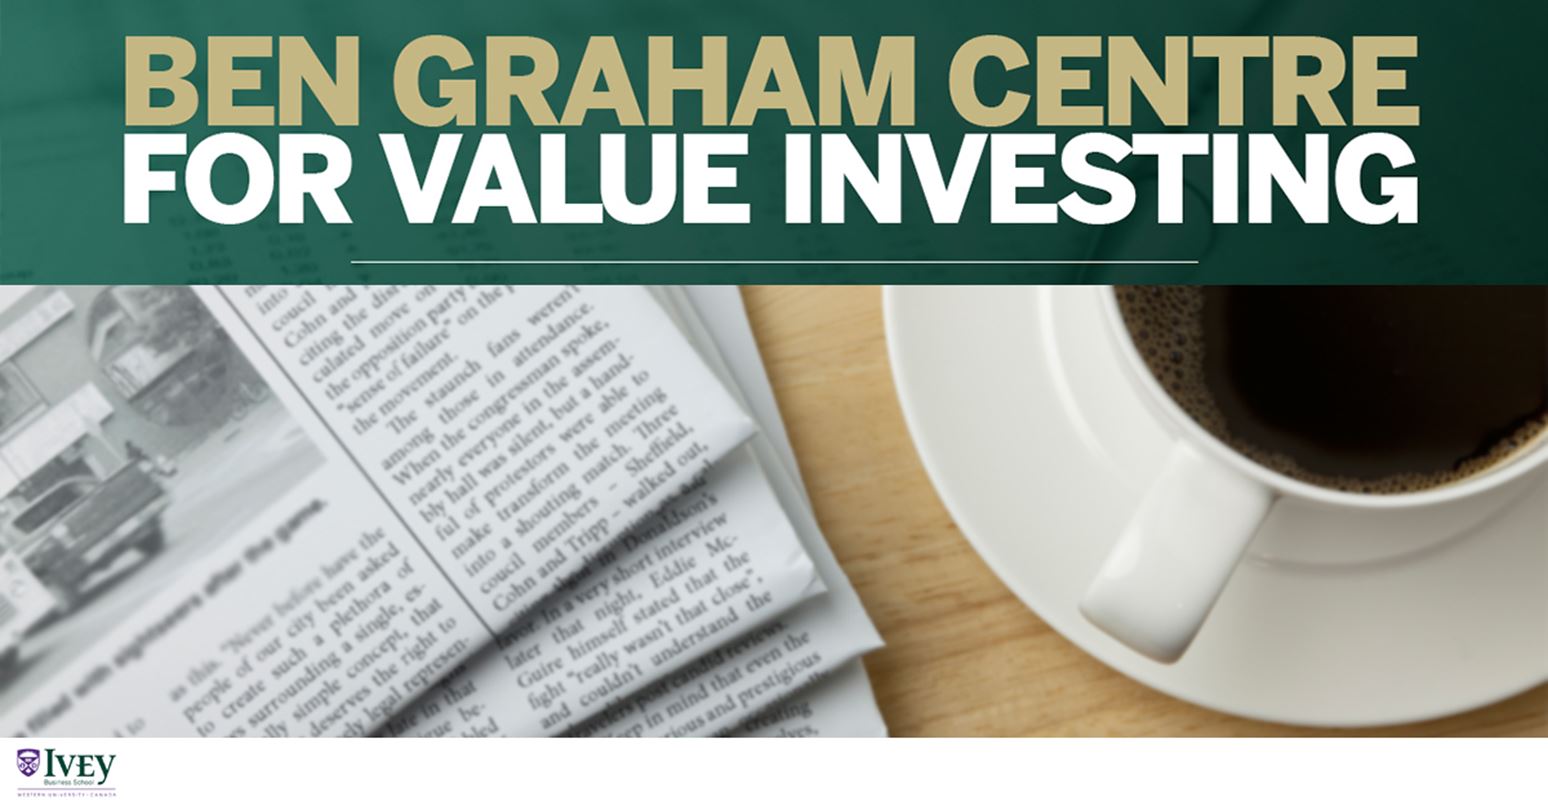 "Why value investors can still outperform the market: An excerpt from a new book by Dr. George Athanassakos"